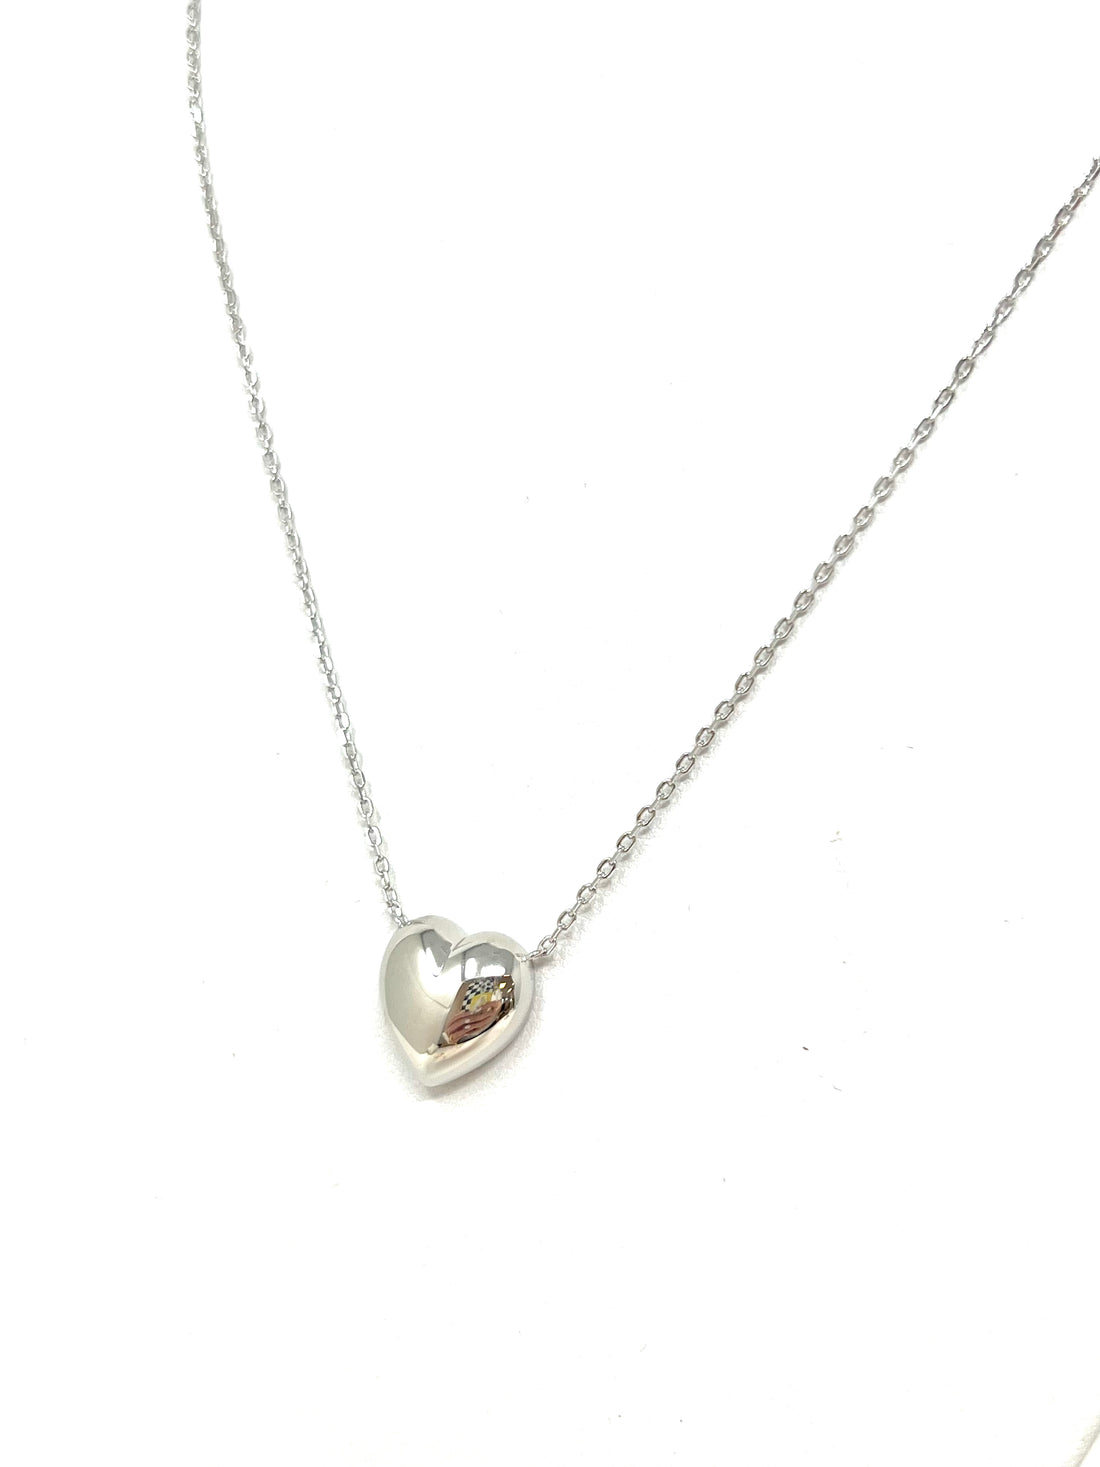 Full Heart Necklace in Silver